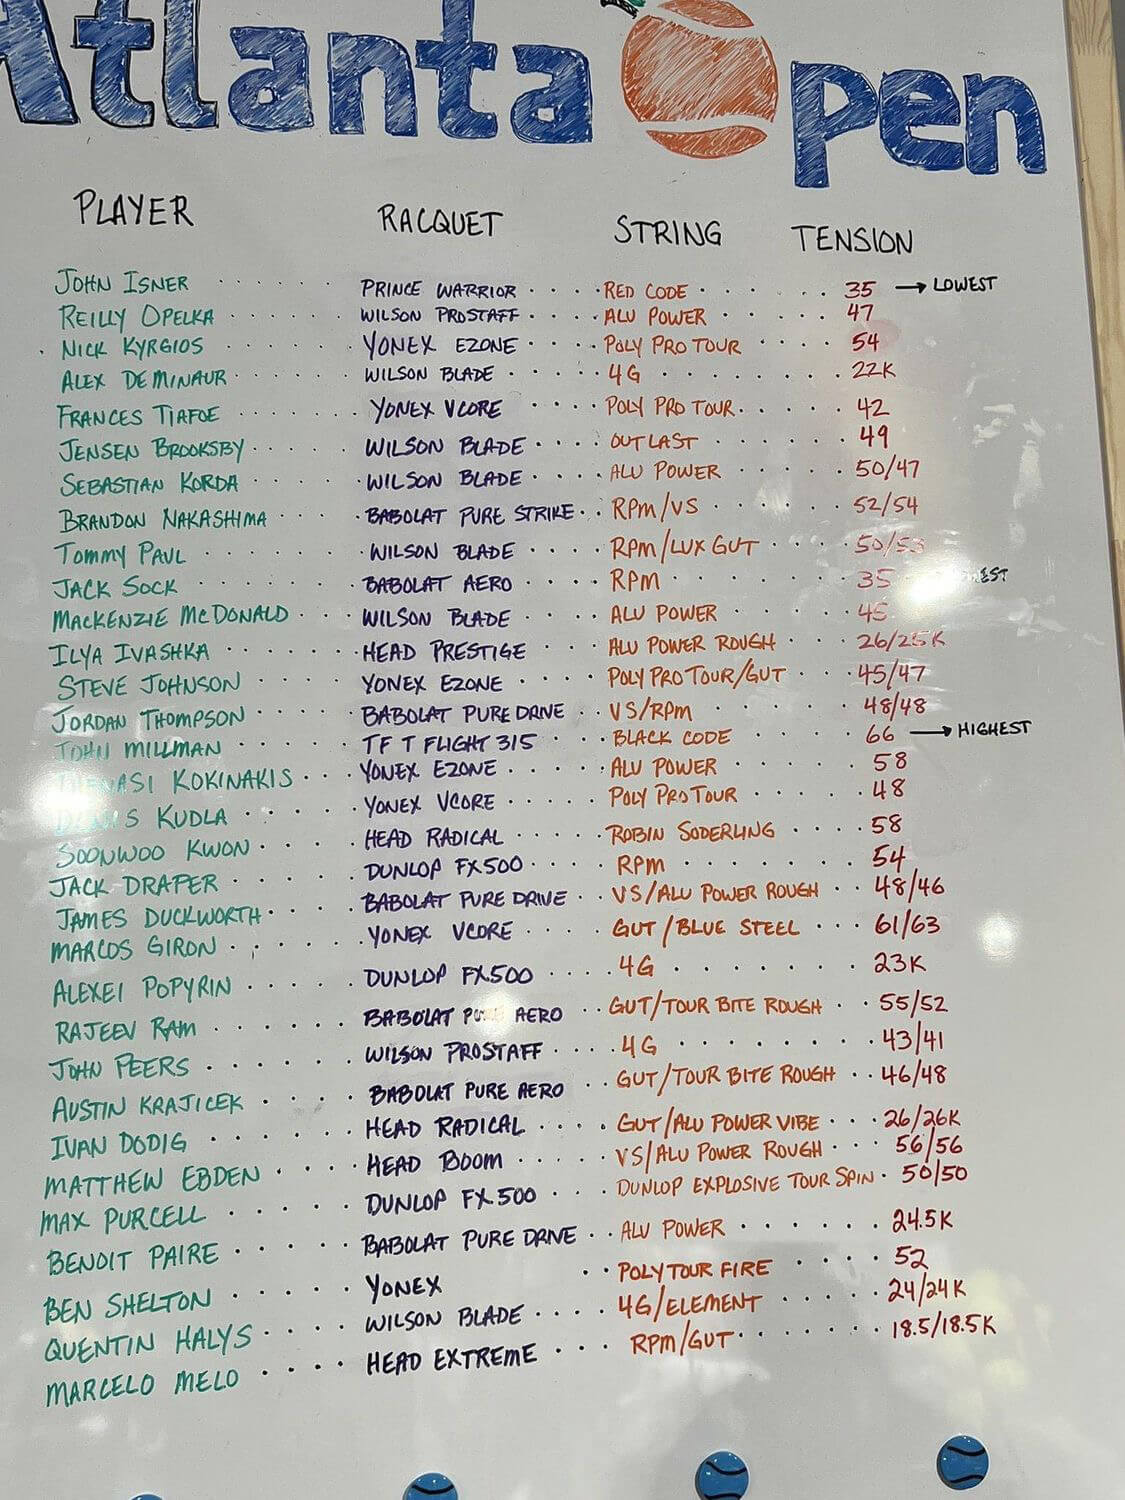 A whiteboard displaying all Atlanta Open players and their racquets, strings, and tension